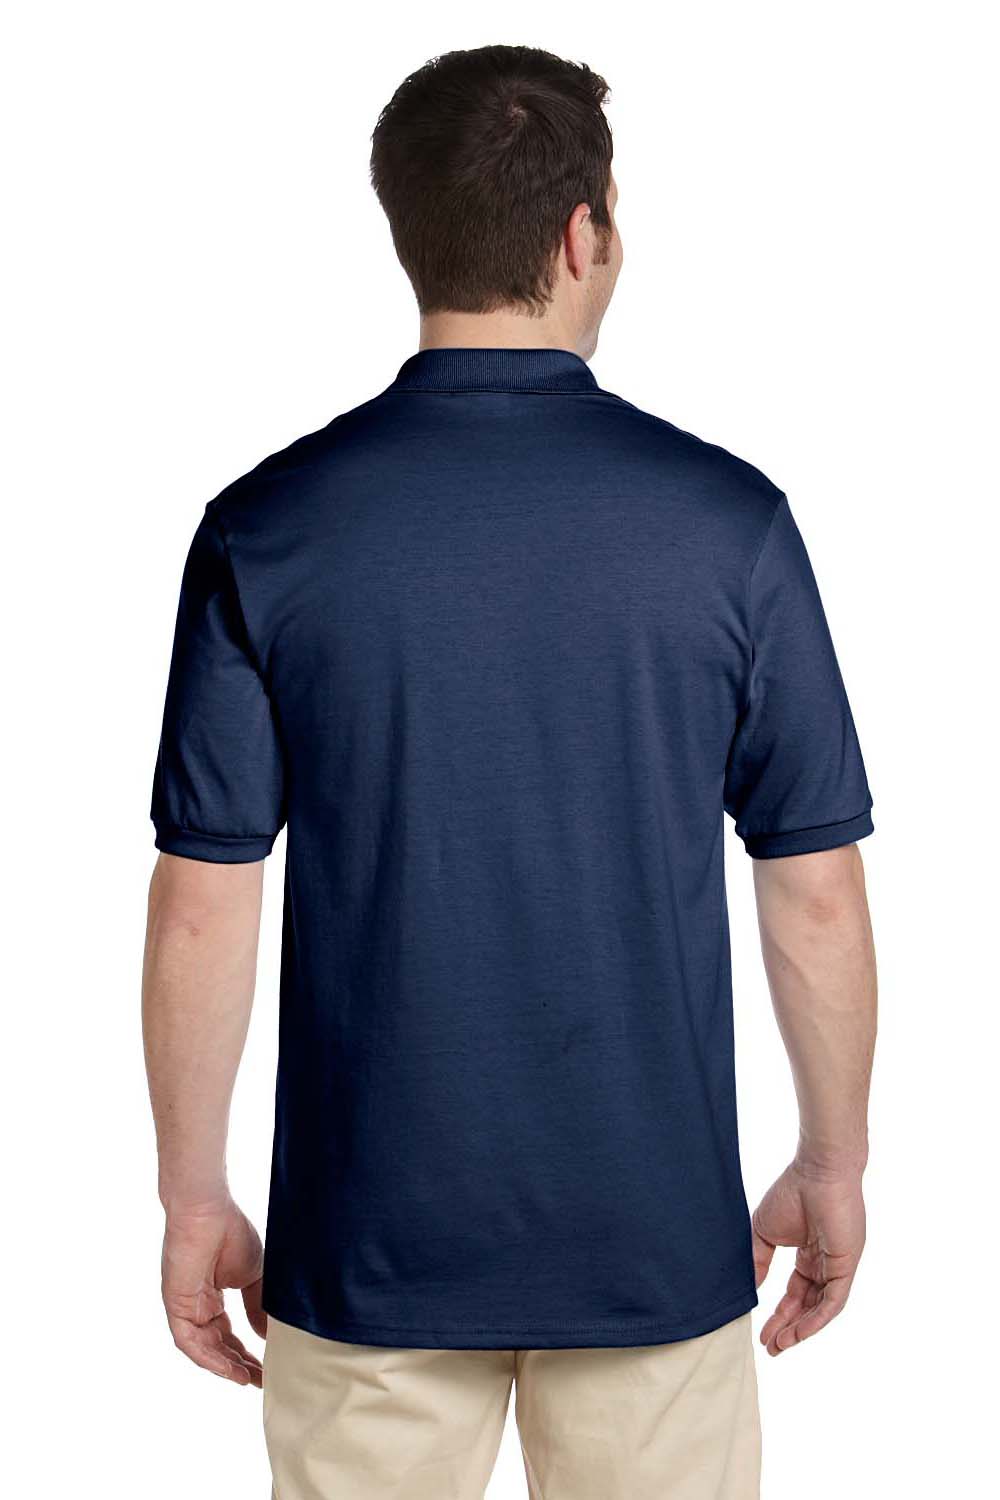 Jerzees 437 Mens SpotShield Stain Resistant Short Sleeve Polo Shirt Navy Blue Back